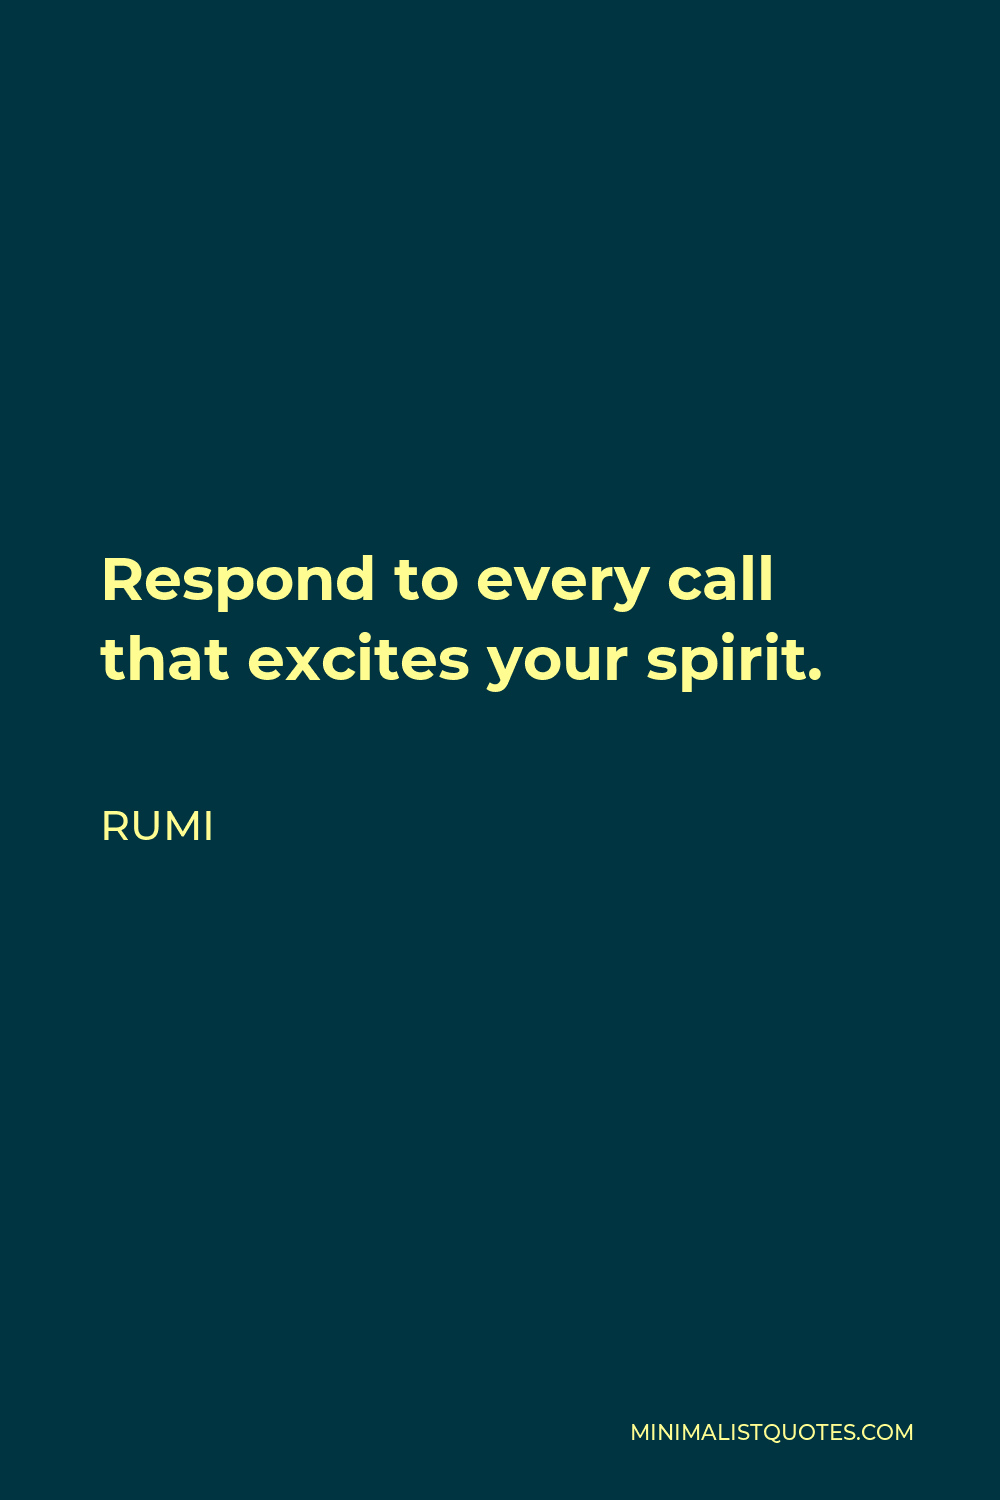 Rumi Quote - Respond to every call that excites your spirit.